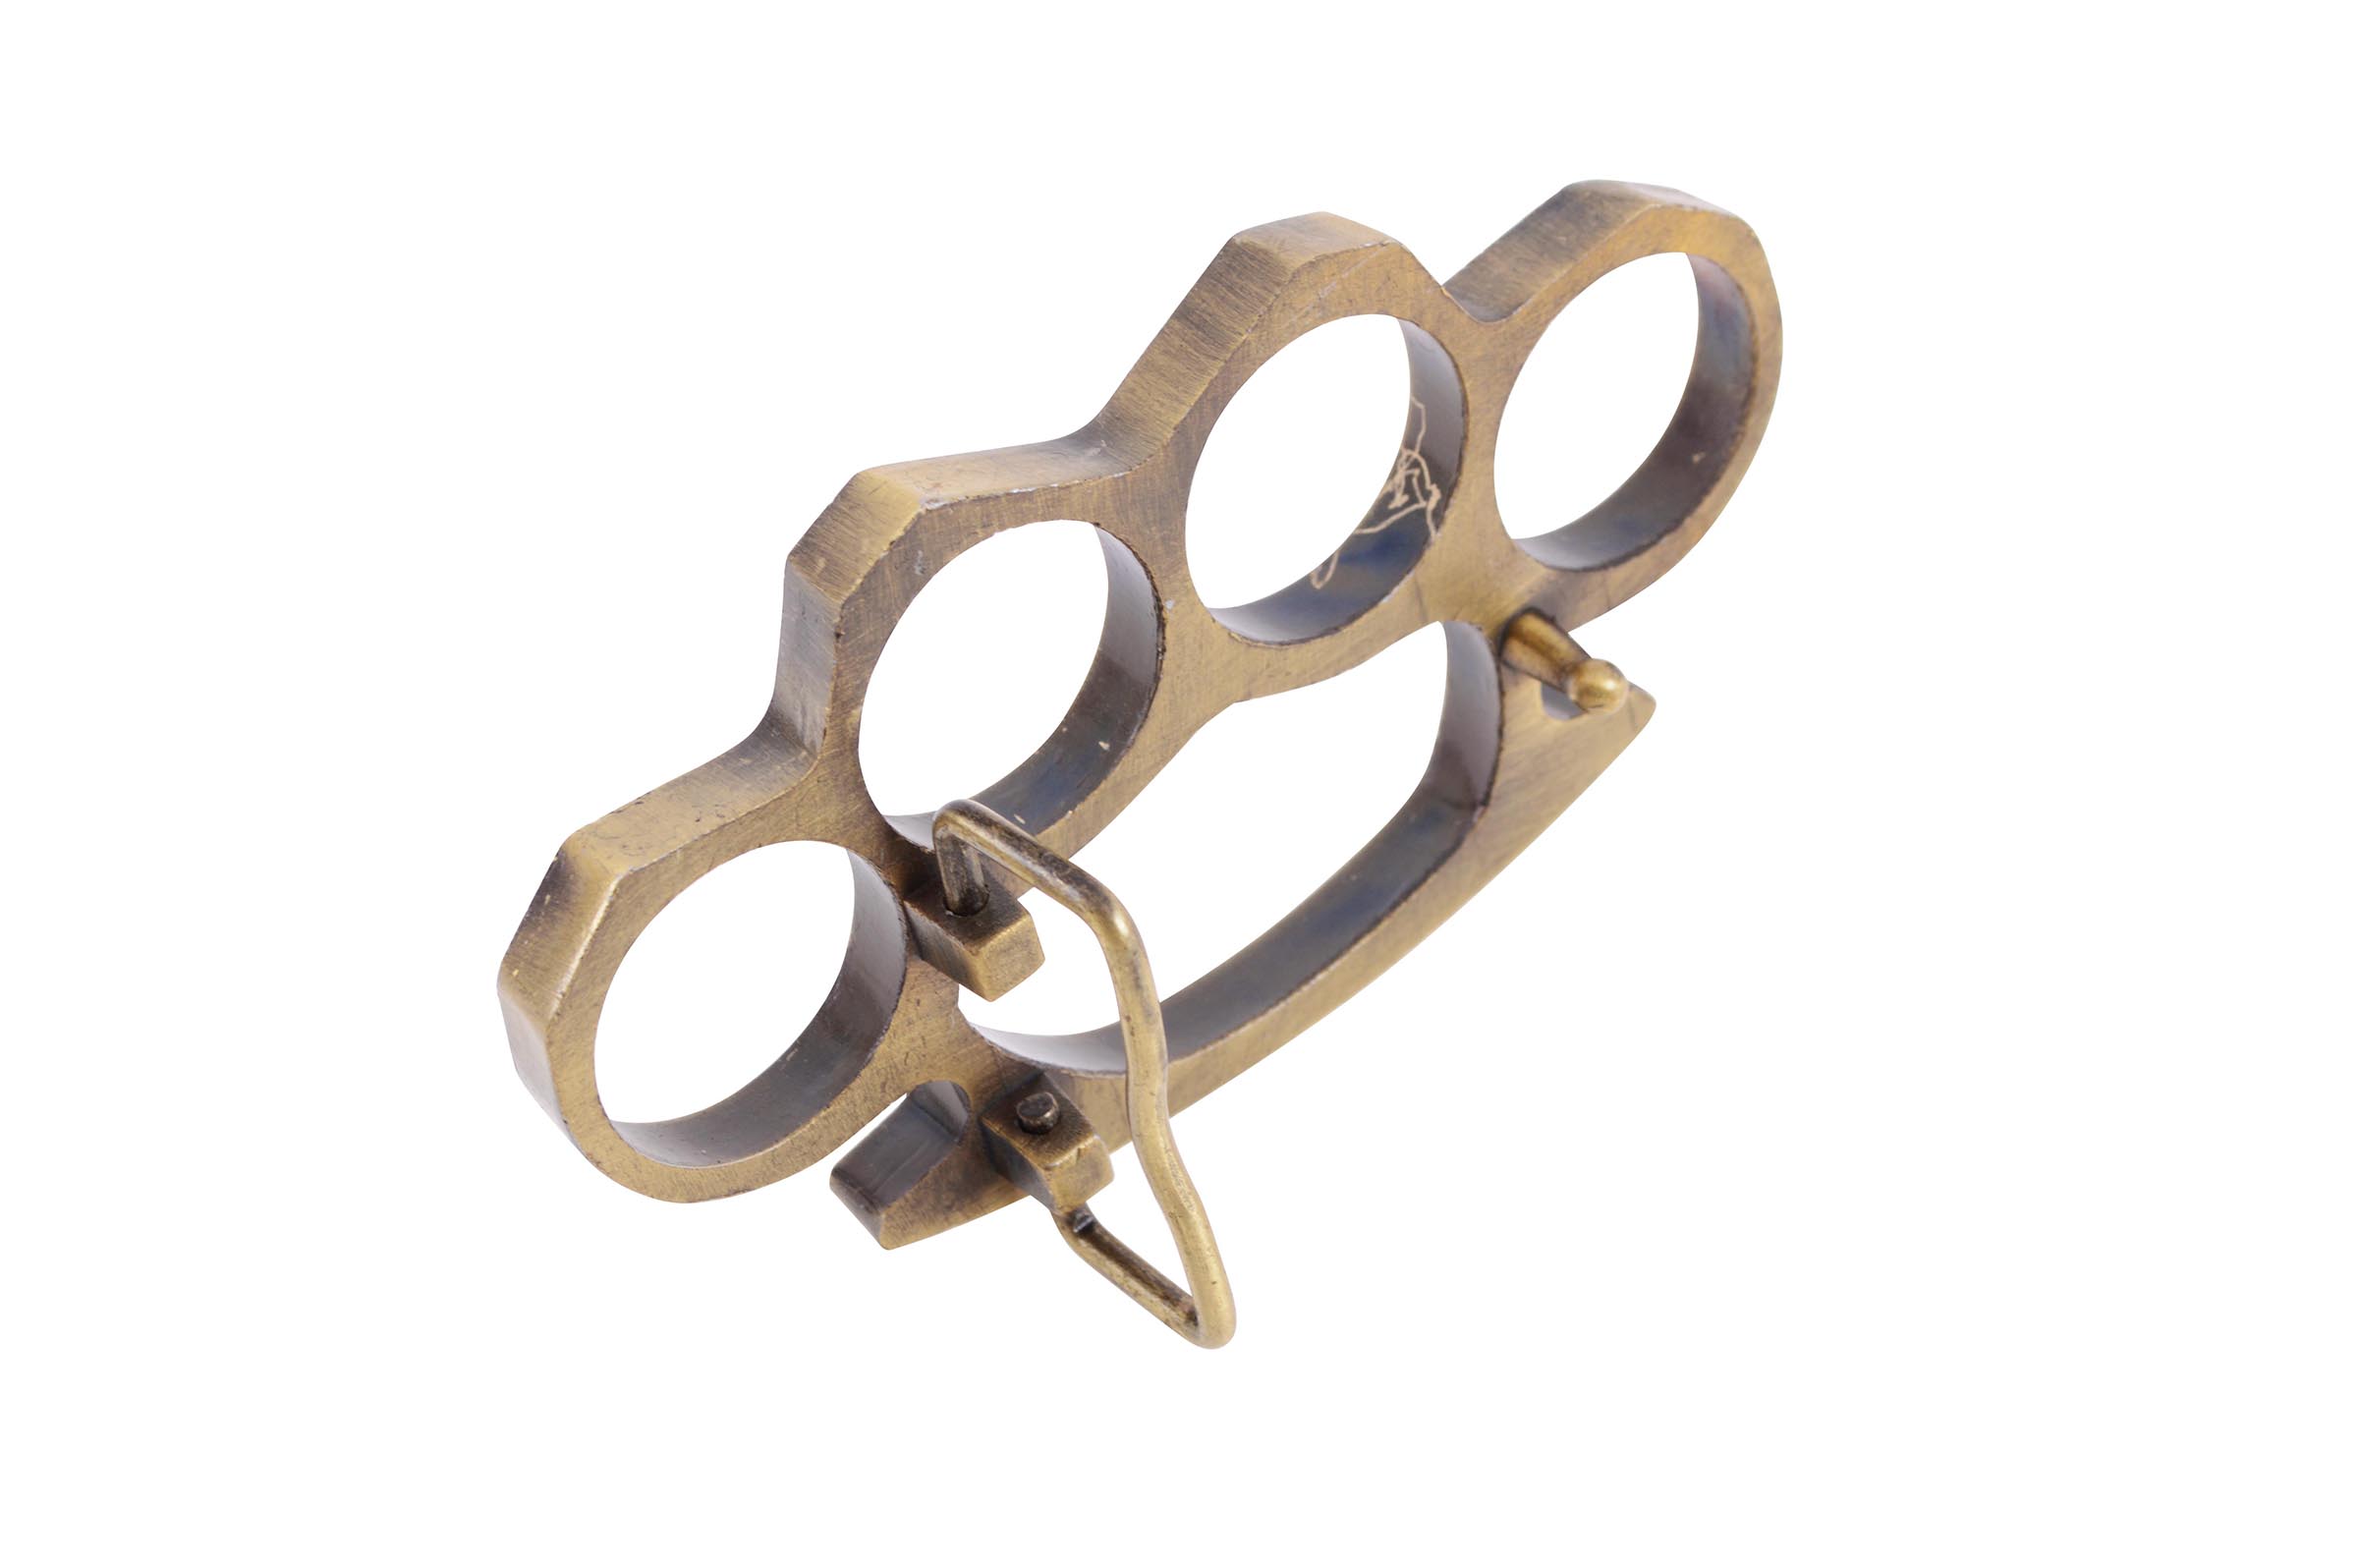 Ghost - Solid Brass Knuckles Duster For Self Defense Window